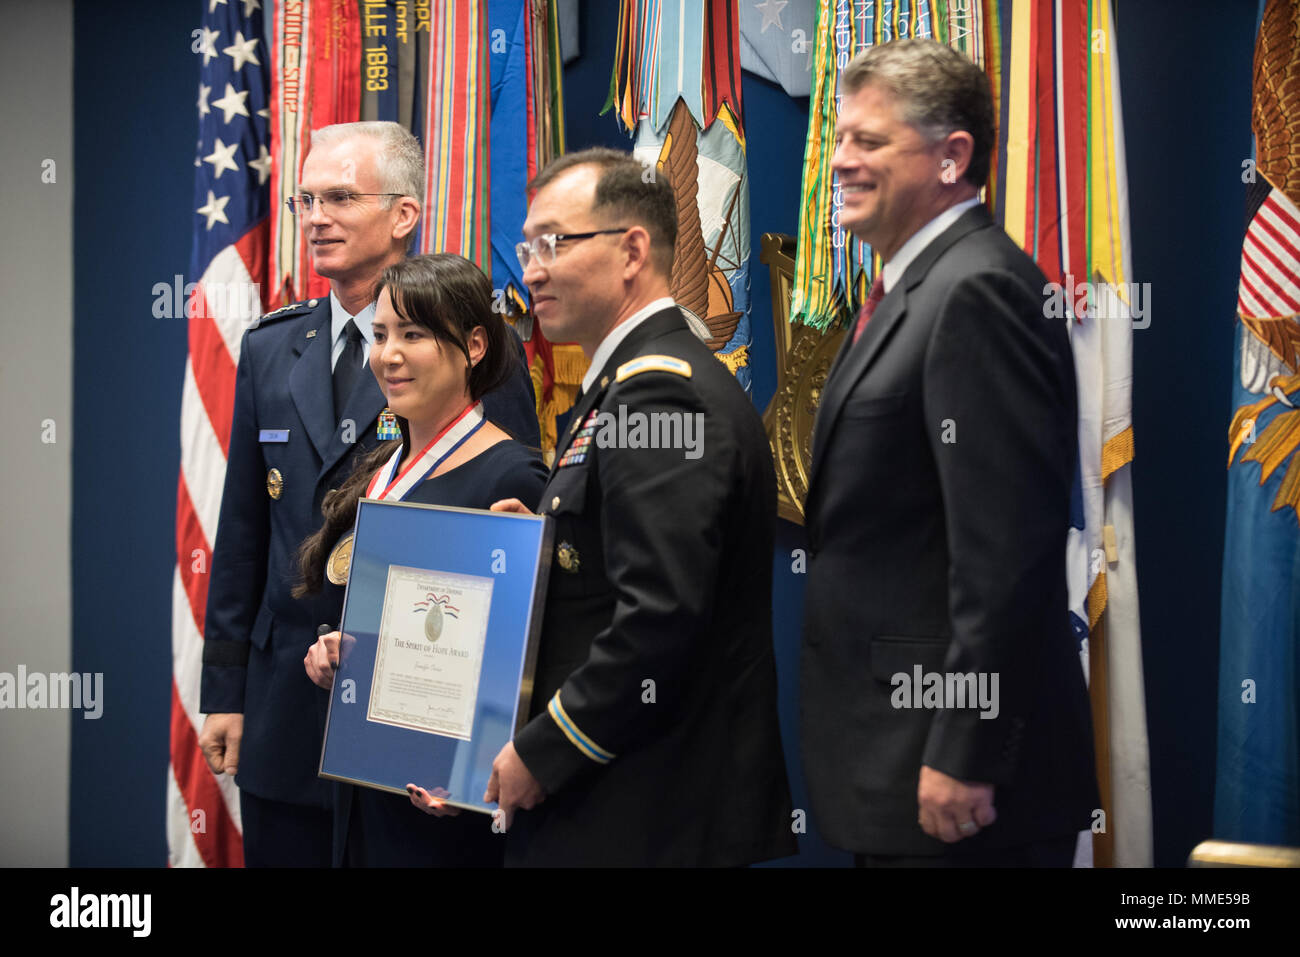 Jennifer Correia, the U.S. Army Awardee, poses for a photo with U.S. Air Force Gen. Paul J. Selva, Vice Chairman of the Joint Chiefs of Staff, and others during the 2017 Spirit of Hope Awards at the Hall of Heroes in the Pentagon, Oct. 26, 2017. The Spirit of Hope Award is awarded to men and women of the U.S. Armed Forces, entertainers, and other distinguished Americans and organizations whose patriotism and service reflect that of Mr. Bob Hope. The recipients selflessly contributed an extraordinary amount of time, talent, or resources to significantly enhance the quality of life or service me Stock Photo